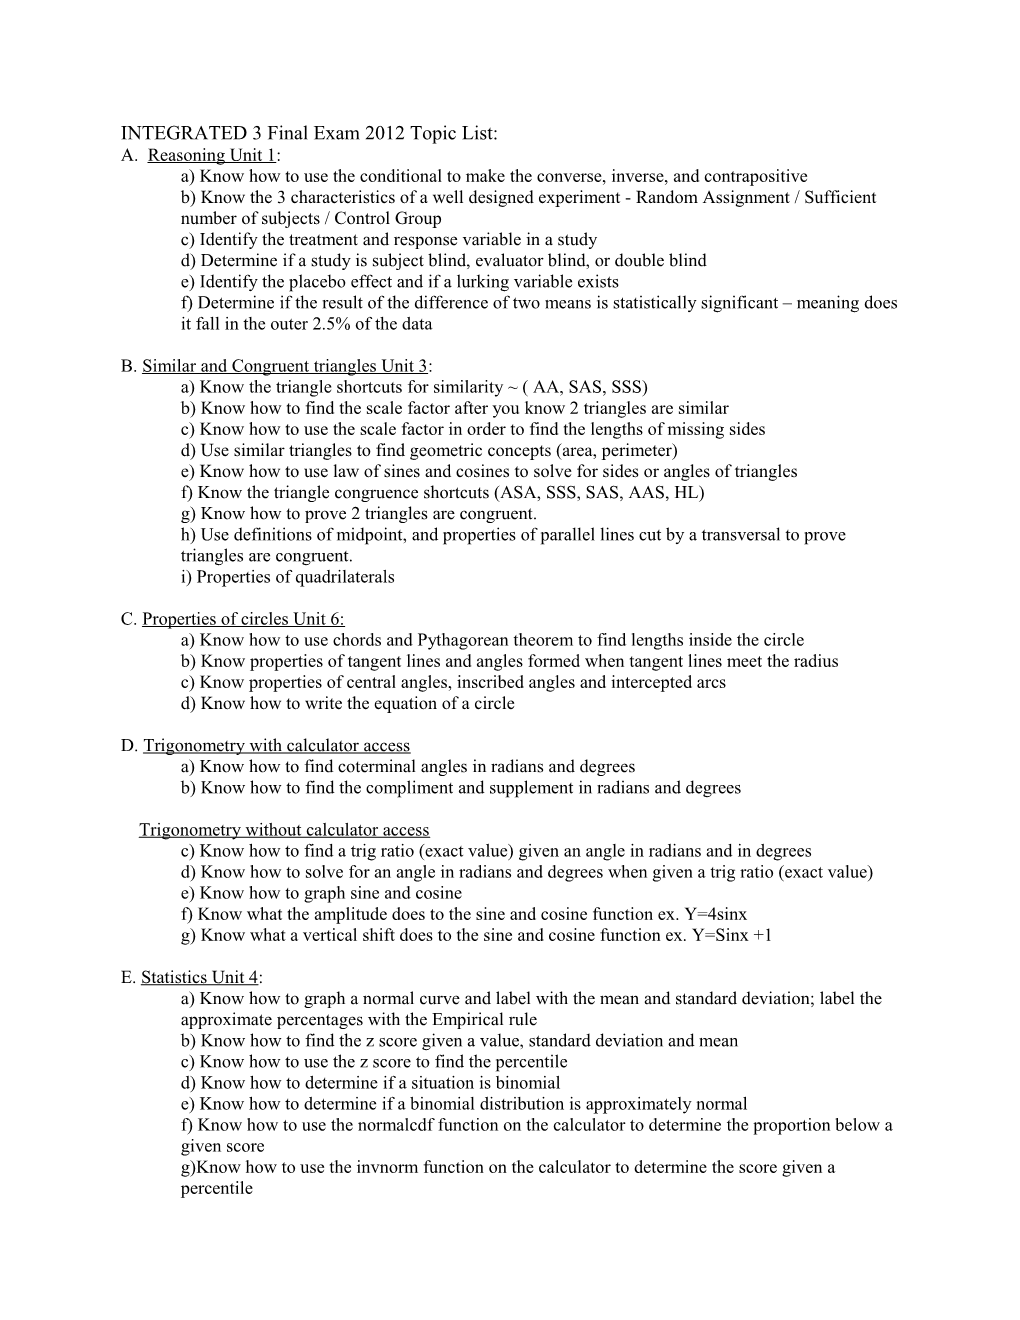 INTEGRATED 3 Final Exam 2012 Topic List